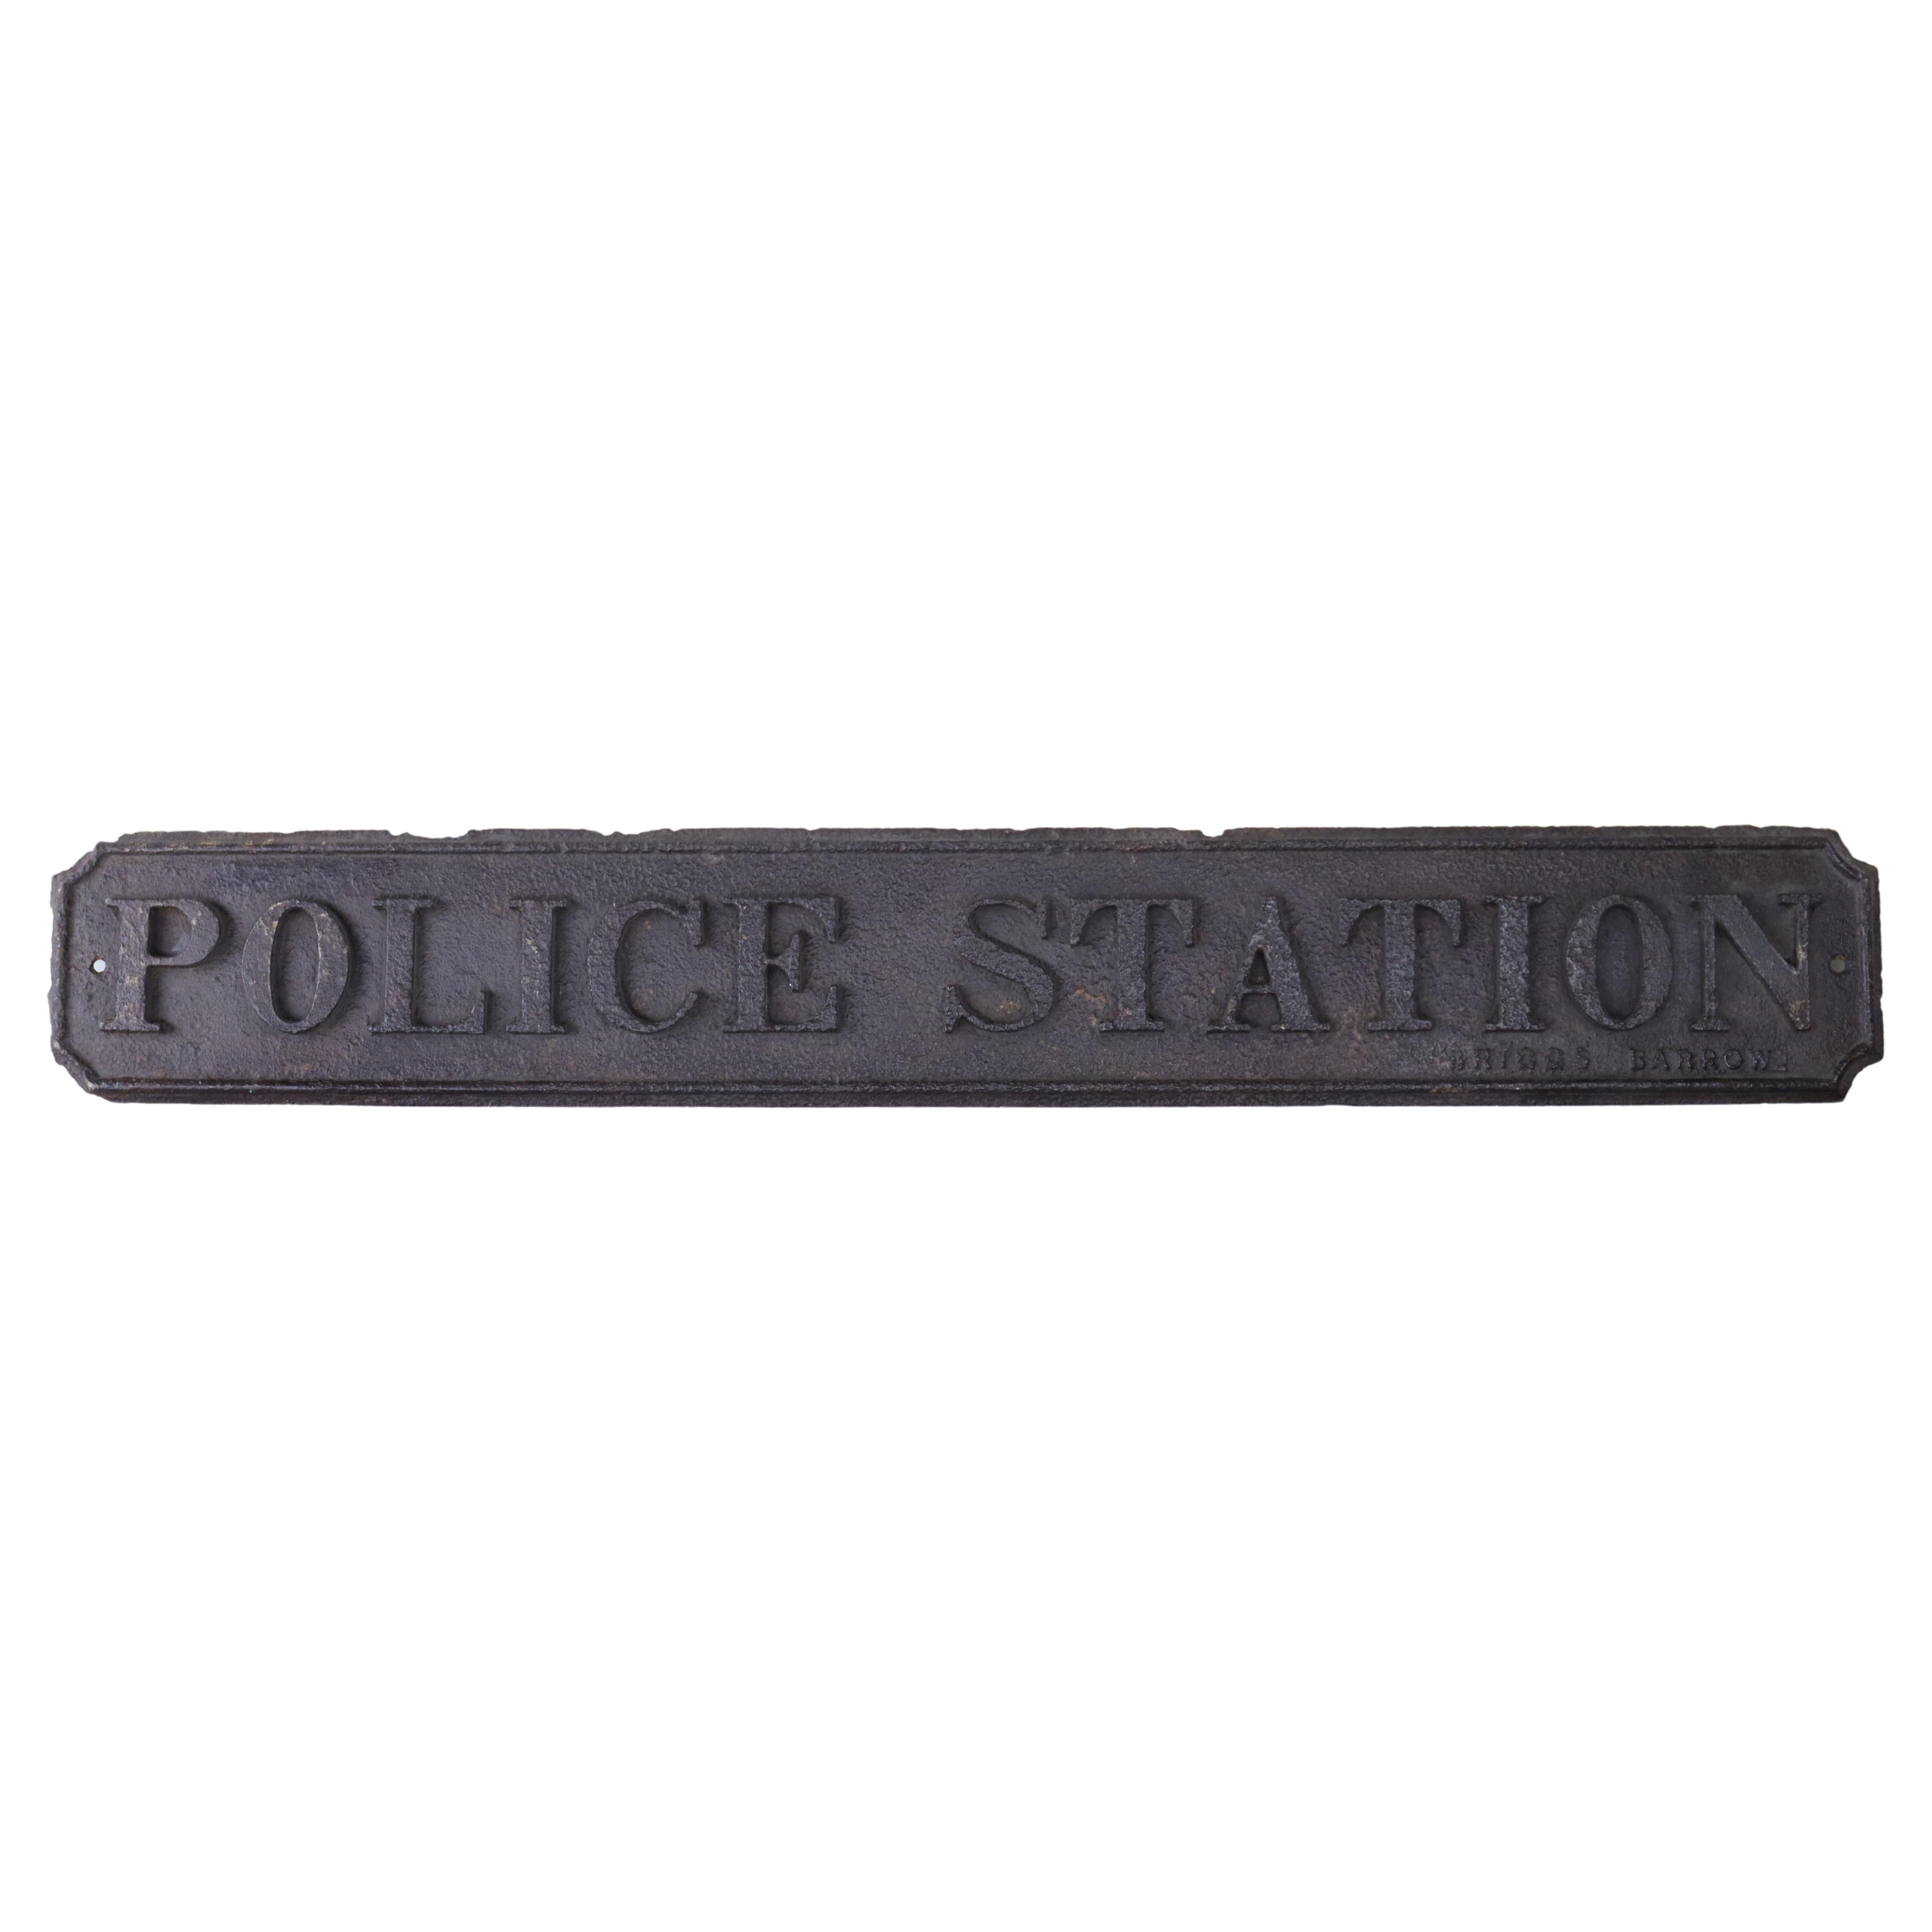 Antique English Wrought Iron Police Station Sign with Briggs Barrow Mark